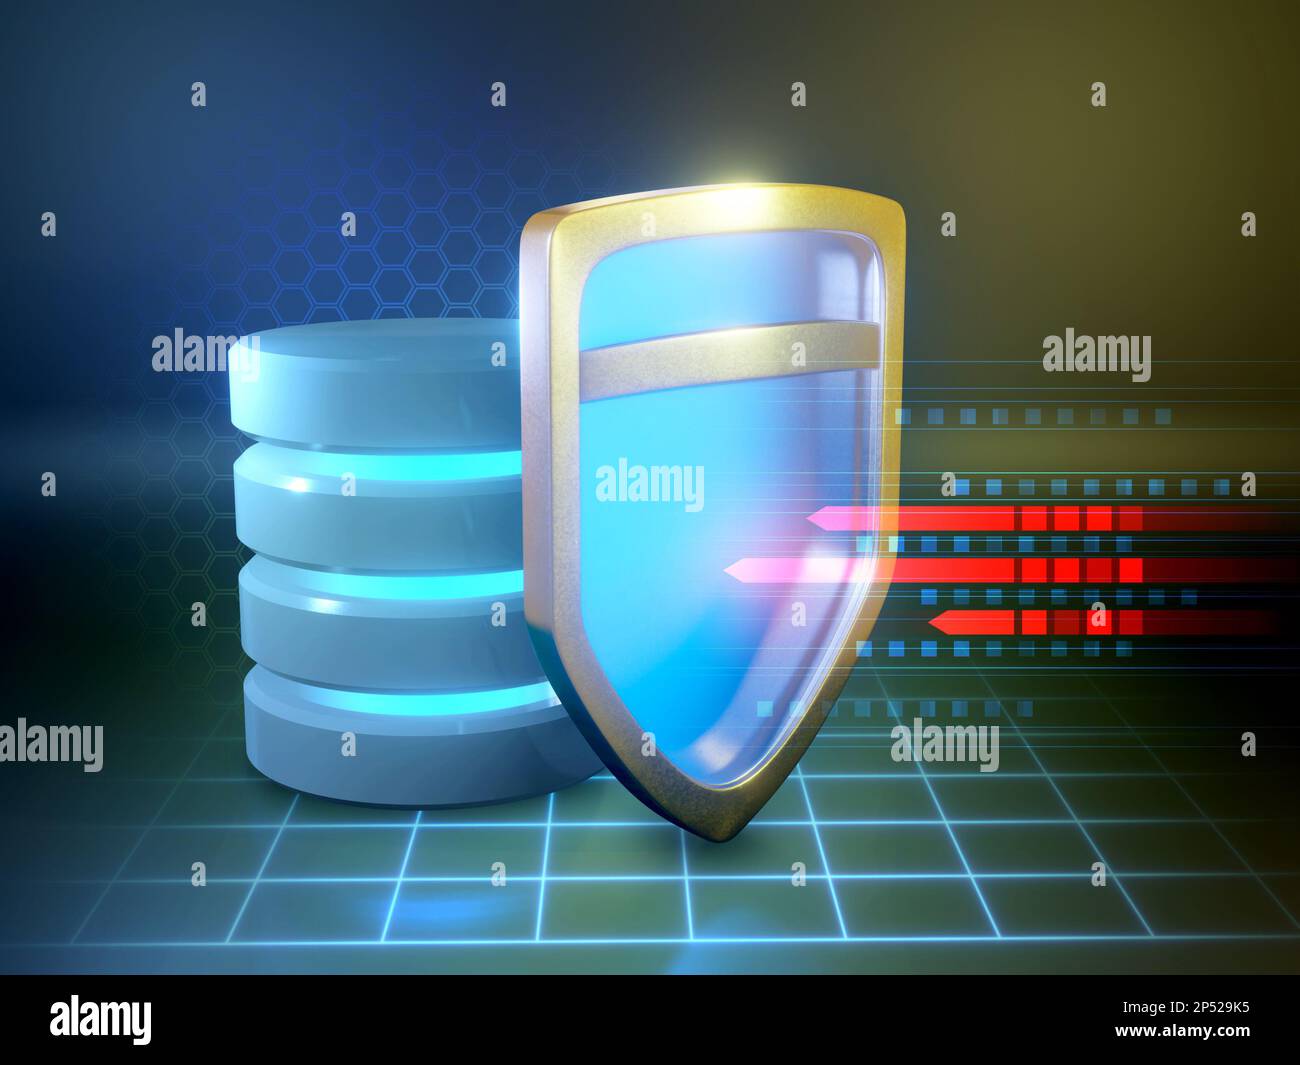 Database protection against malicious code attacks. Digital illustration, 3D render. Stock Photo